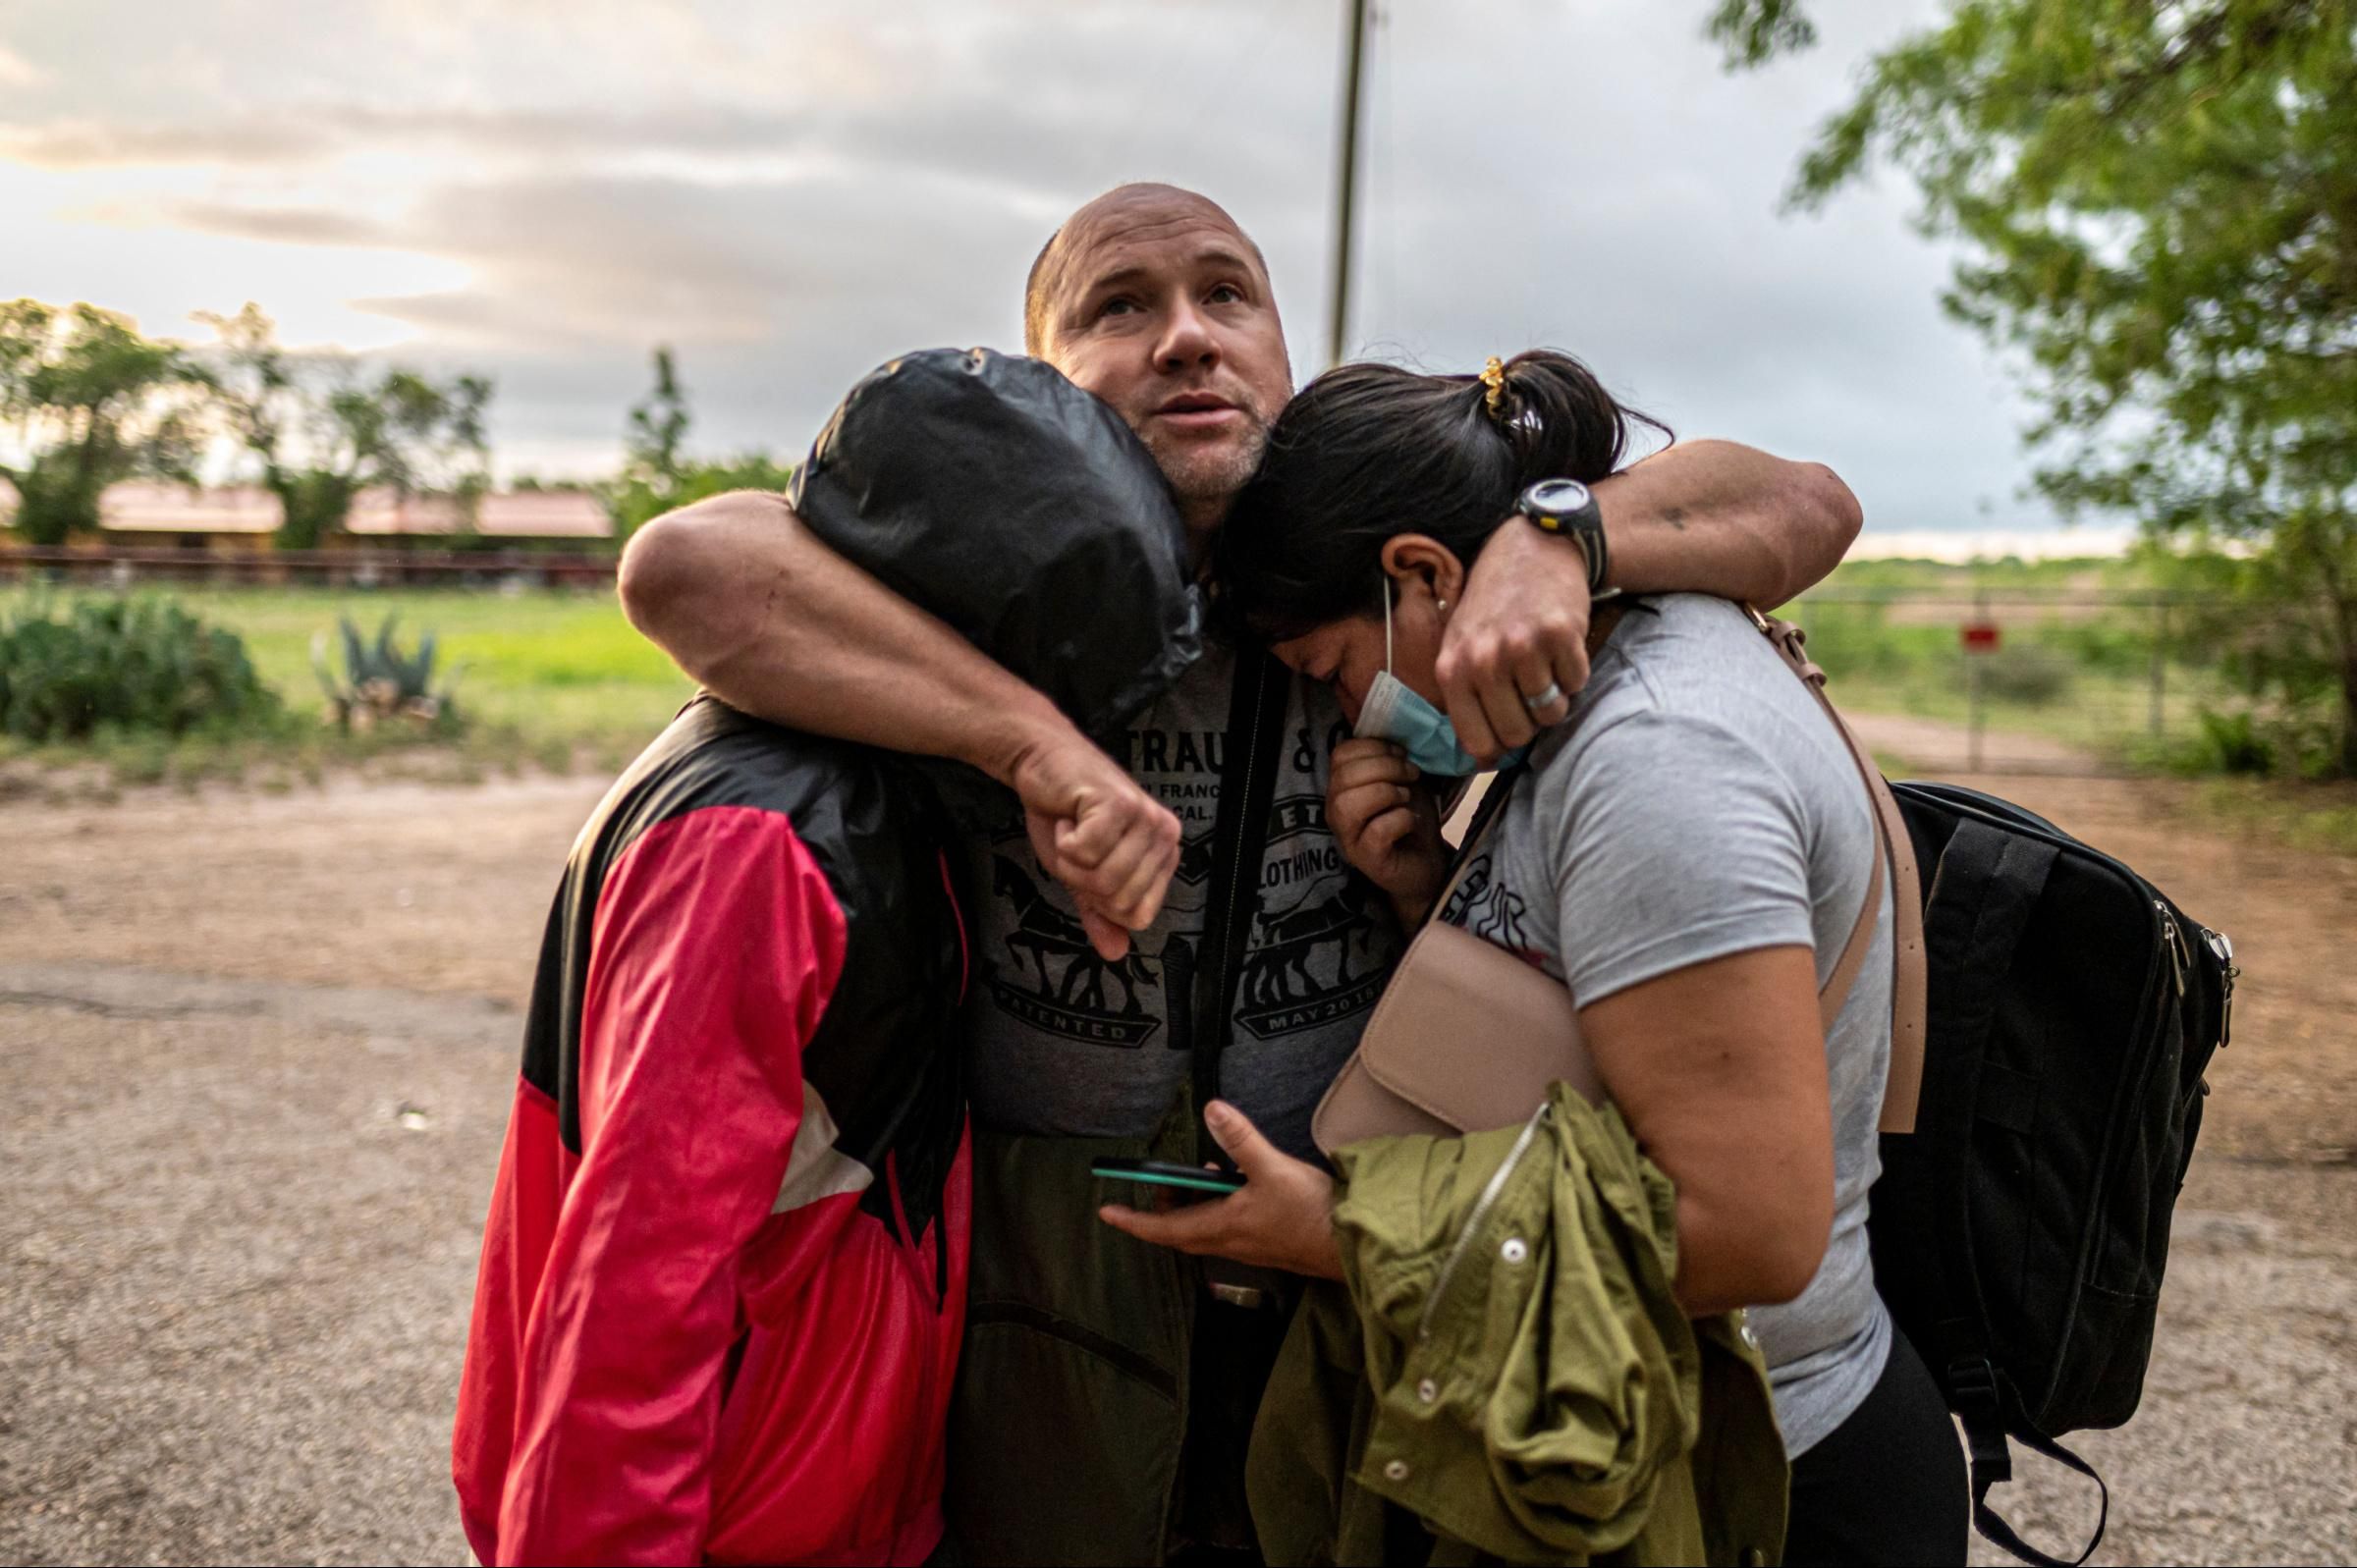 Asylum-seeking migrants' families wait to be escorted by the U.S. Border Patrol after crossing the Rio Grande into the United States from Mexico on May 8, 2021 in Roma, Texas. (Photo: Go Nakamura/Getty Images)